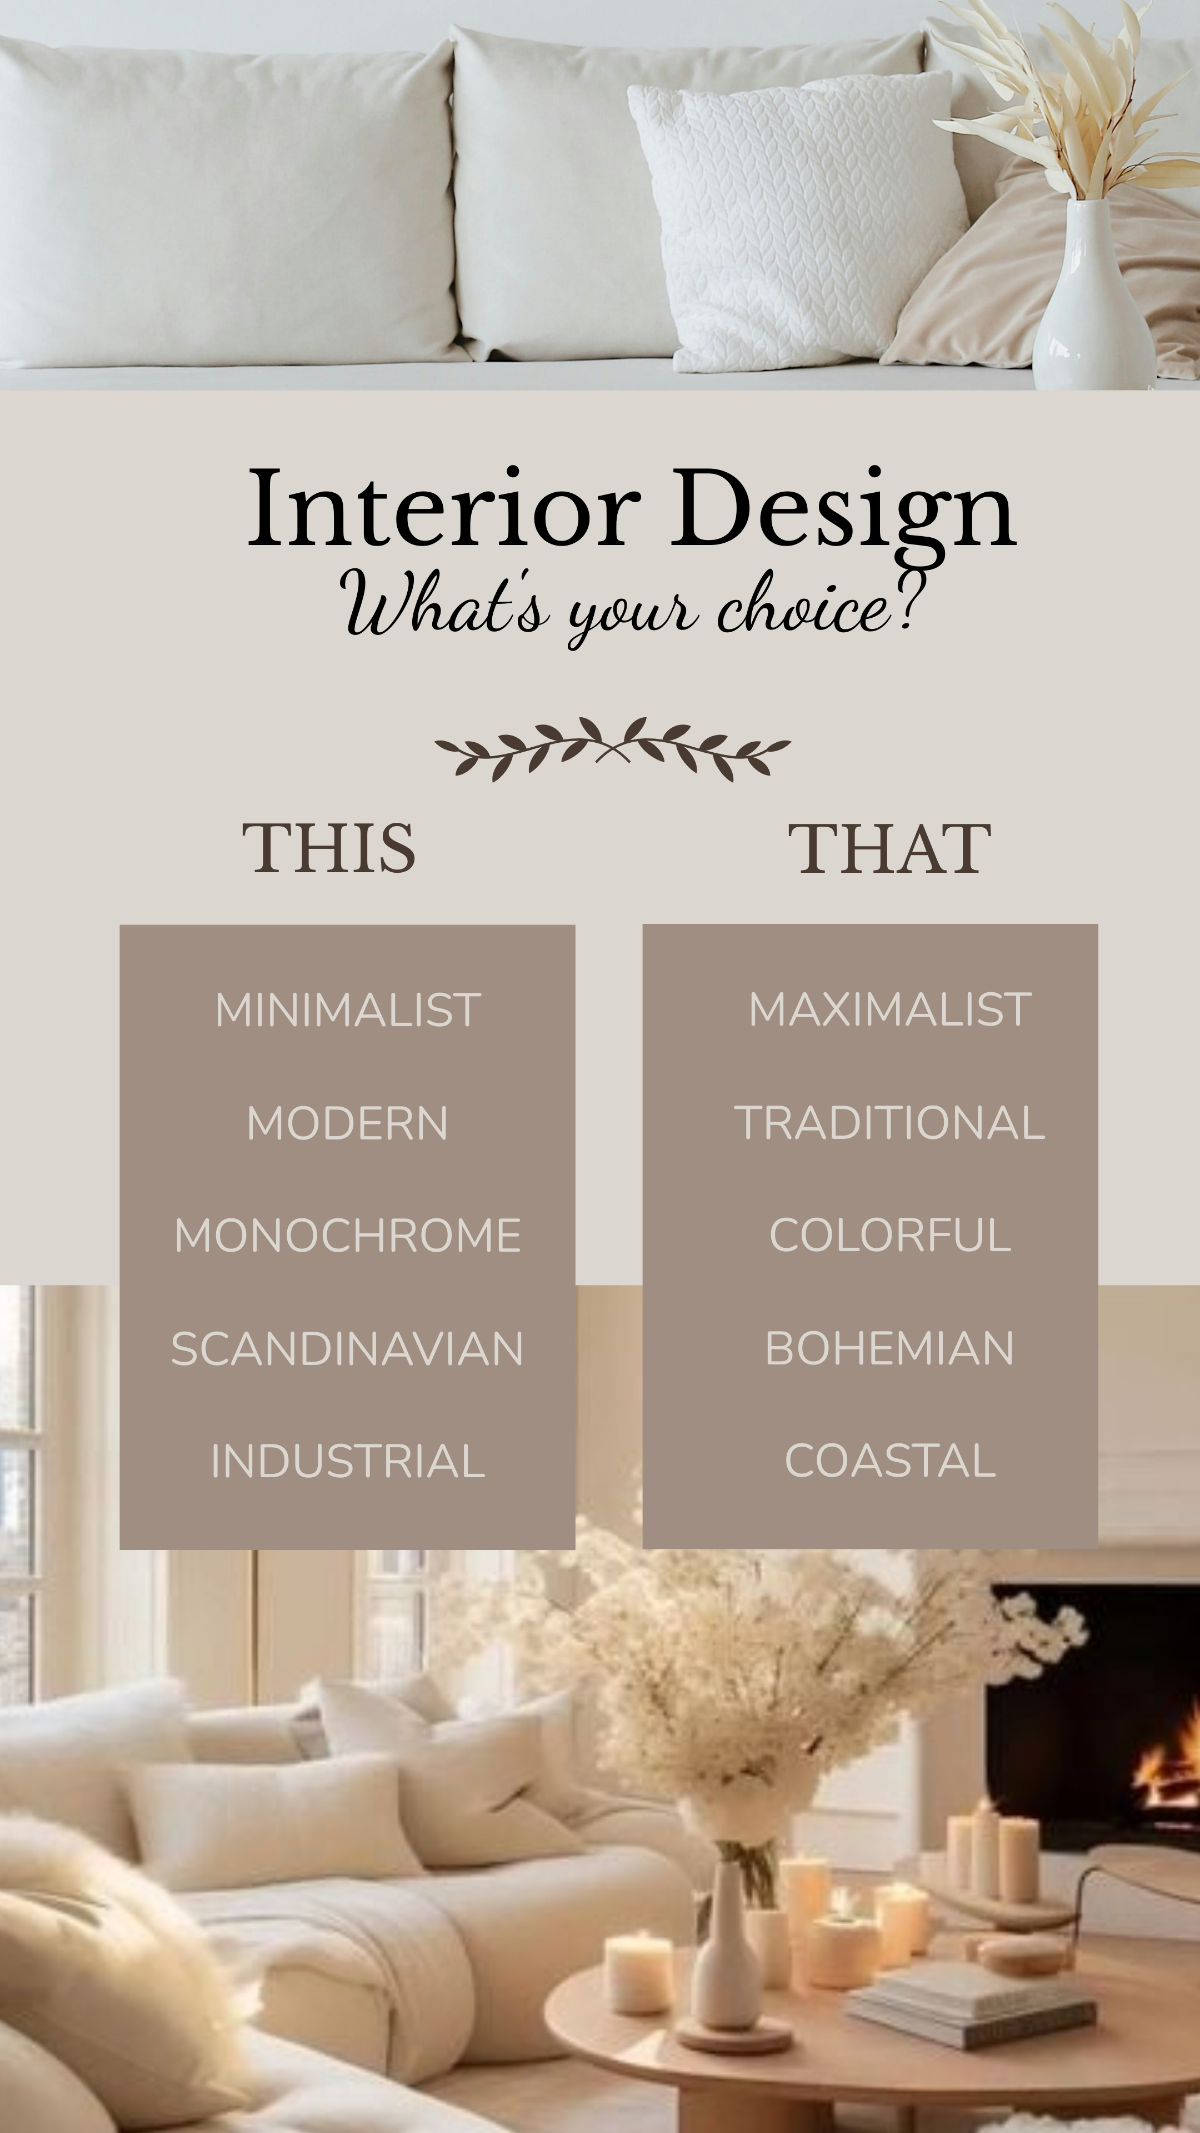 This or That Interior Design Instagram Story Template